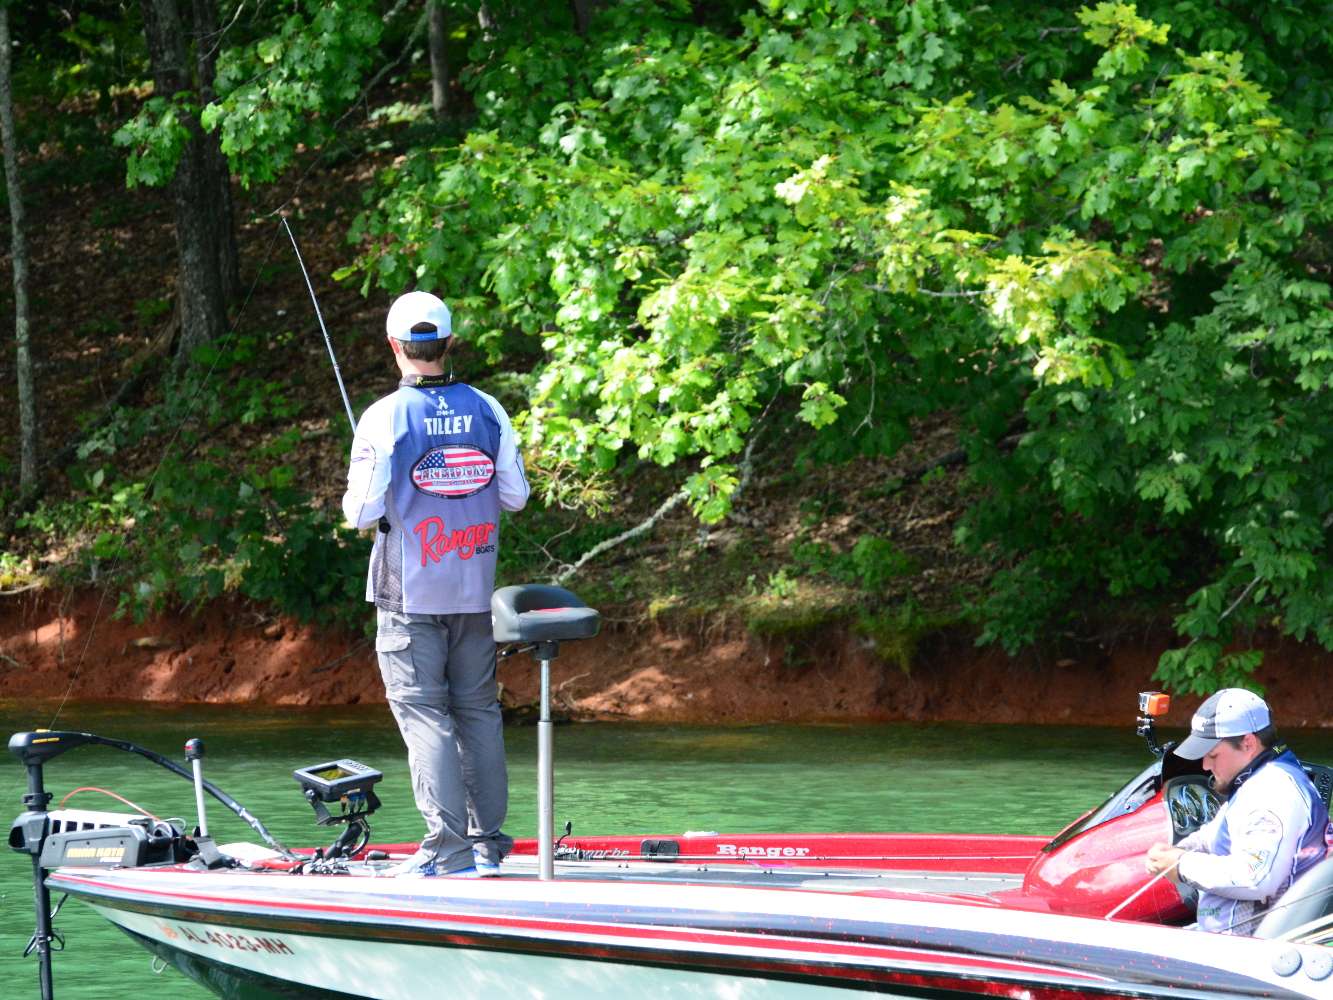 Hayden Tilley and Alex Clayton of Northeast Alabama Community College are only catching short fish.
